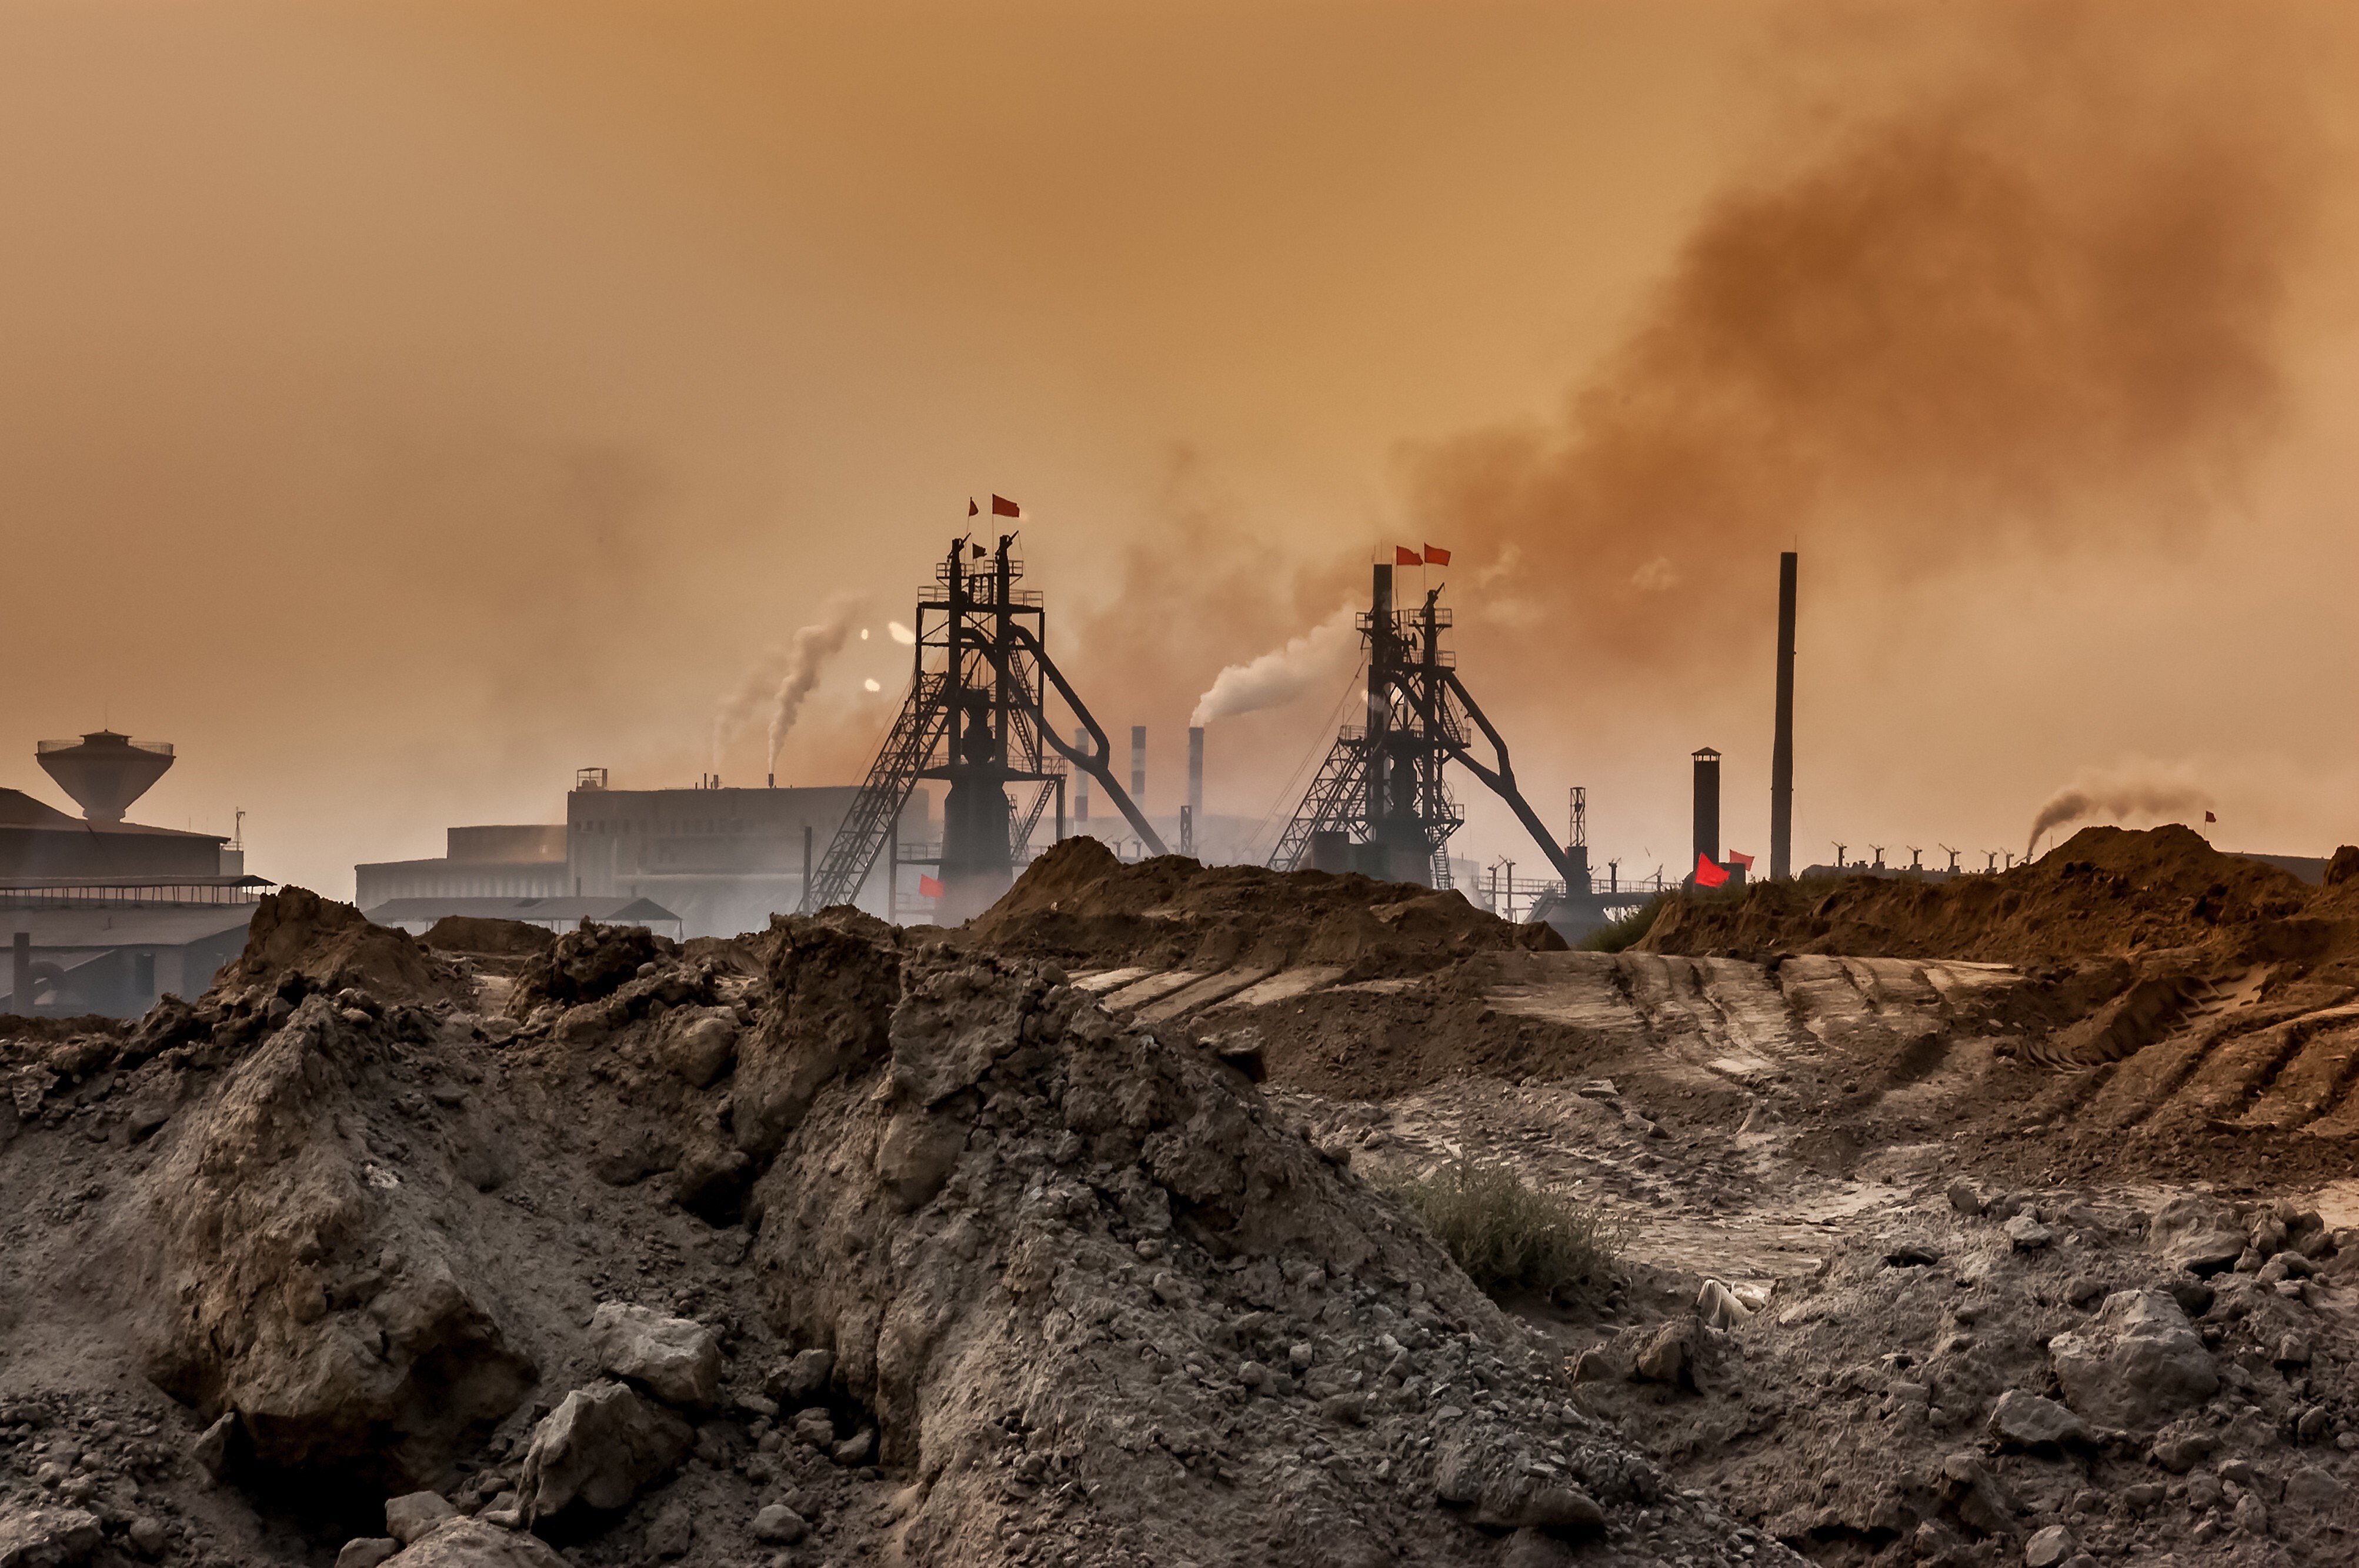 An industrial plant in Baotou, in Inner Mongolia, China. Photo: Shutterstock